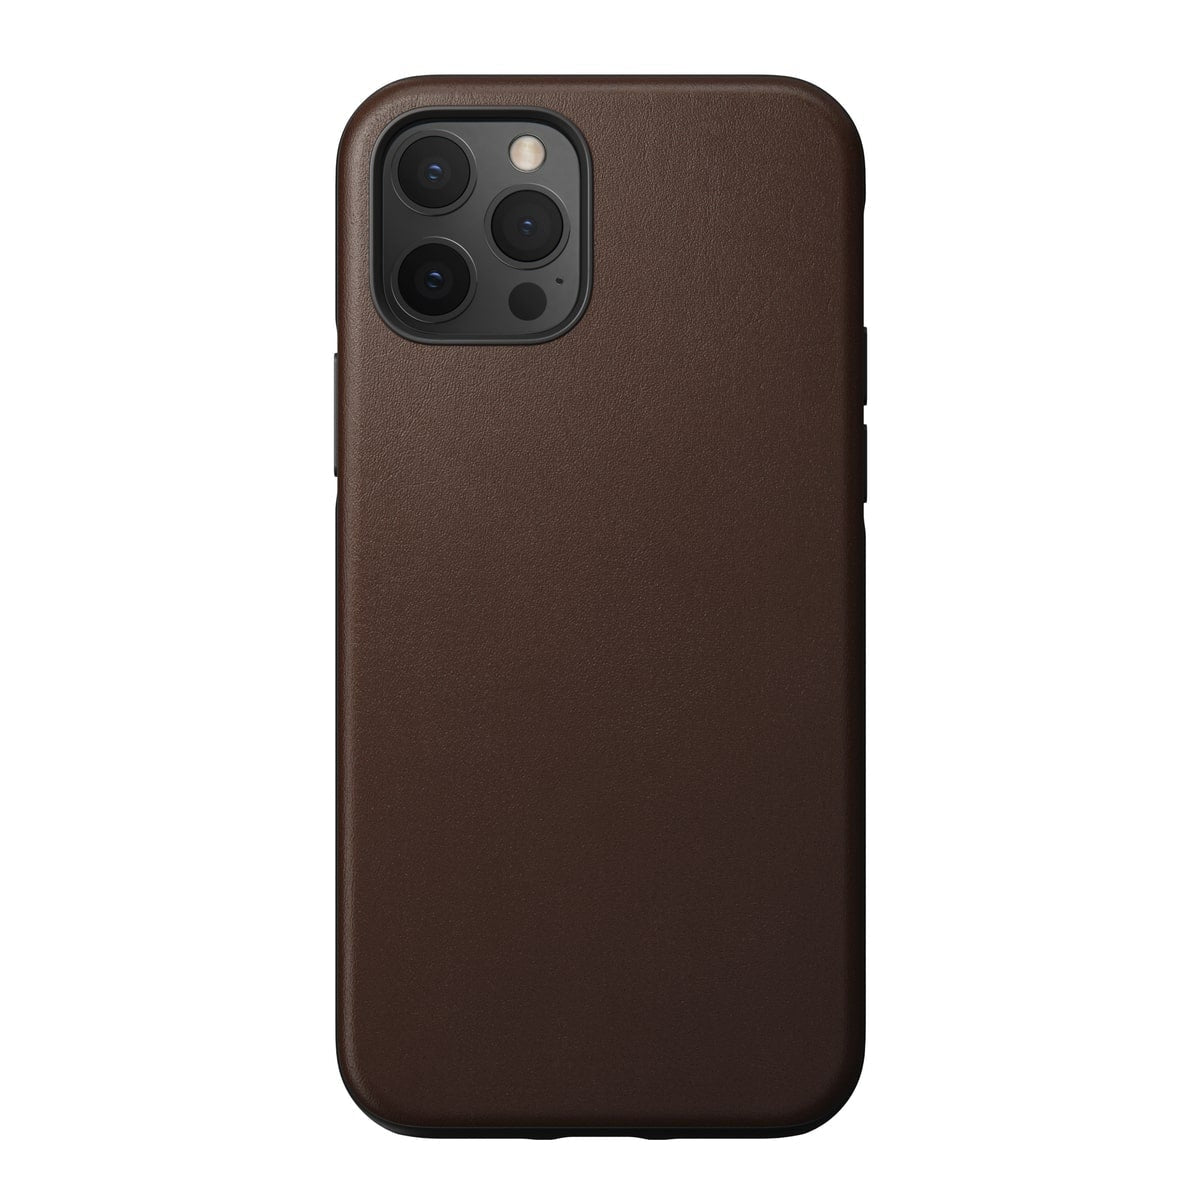 Husa Piele Naturala Nomad Rugged - iPhone 12 & Pro - Brown - NM21gR0R00 - 856500019246 - 10